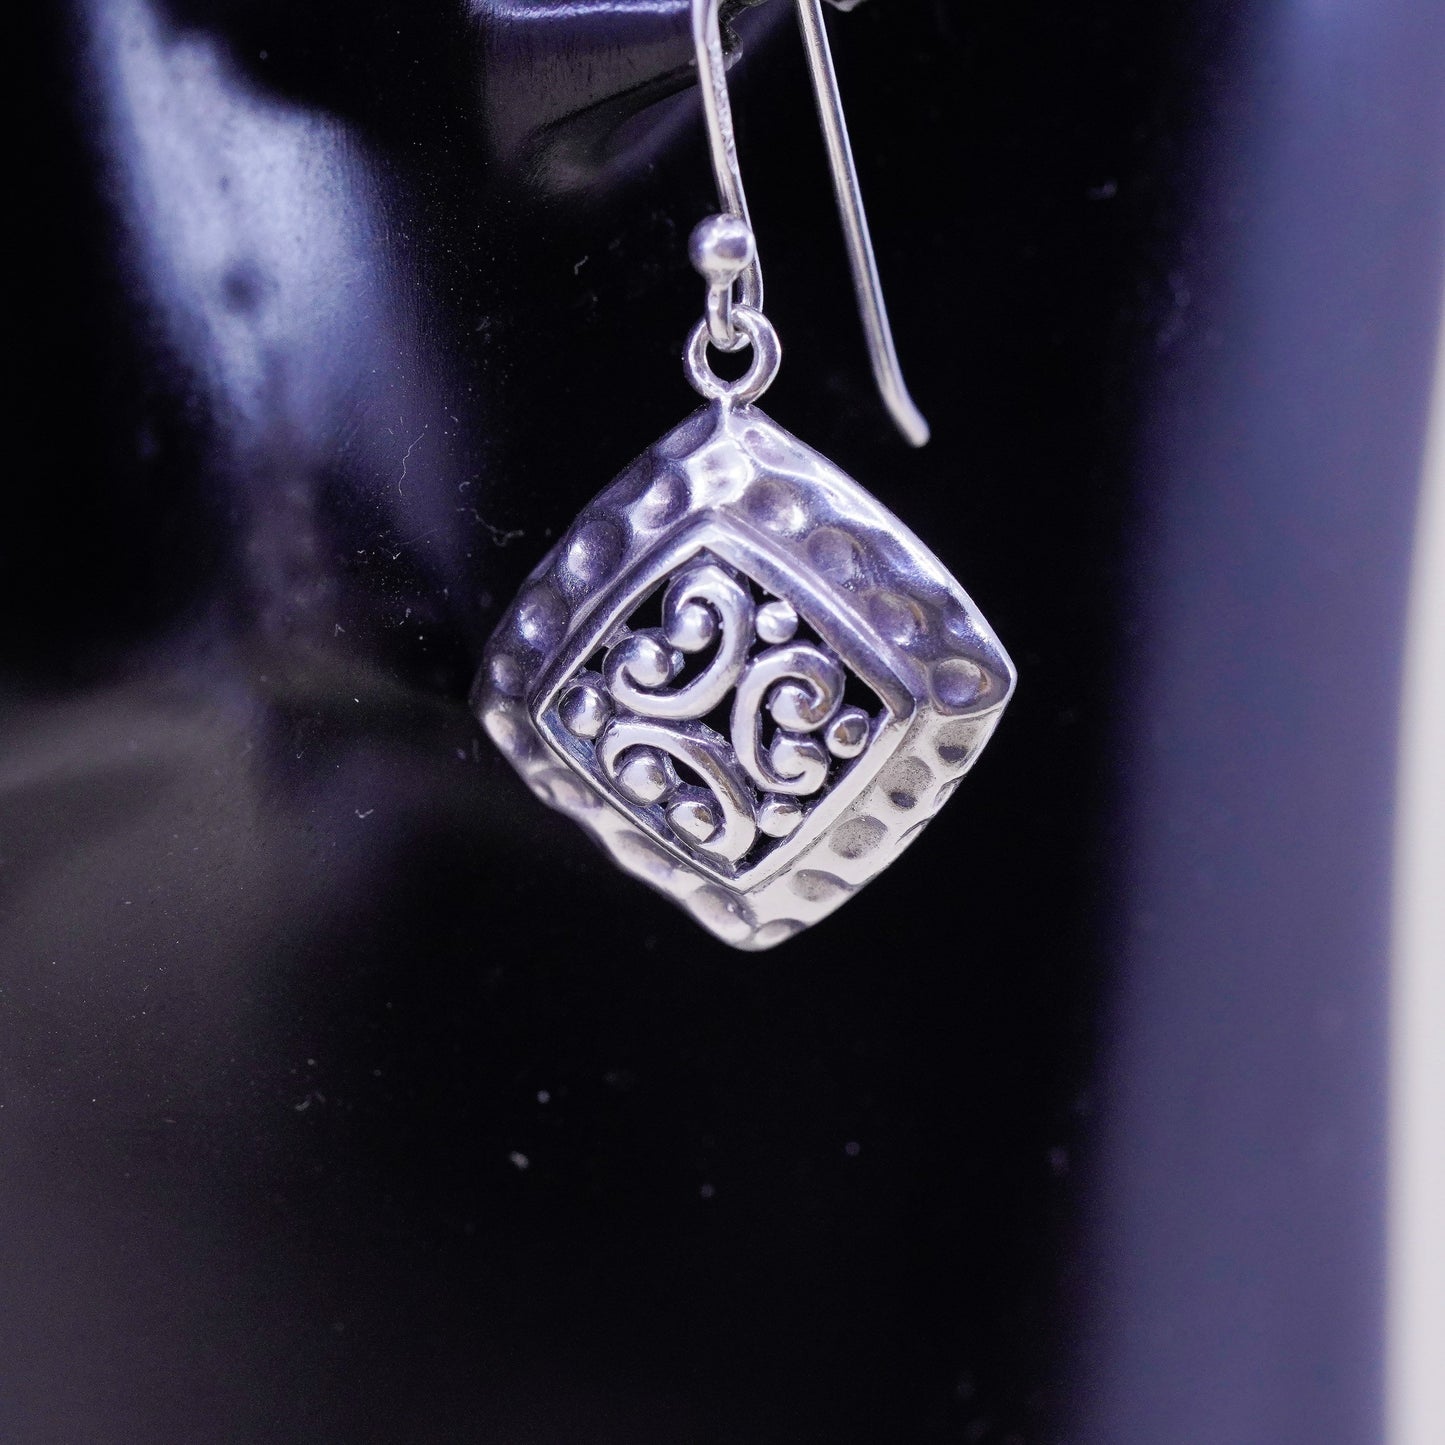 Vintage bali Sterling silver handmade earrings, 925 square with filigree